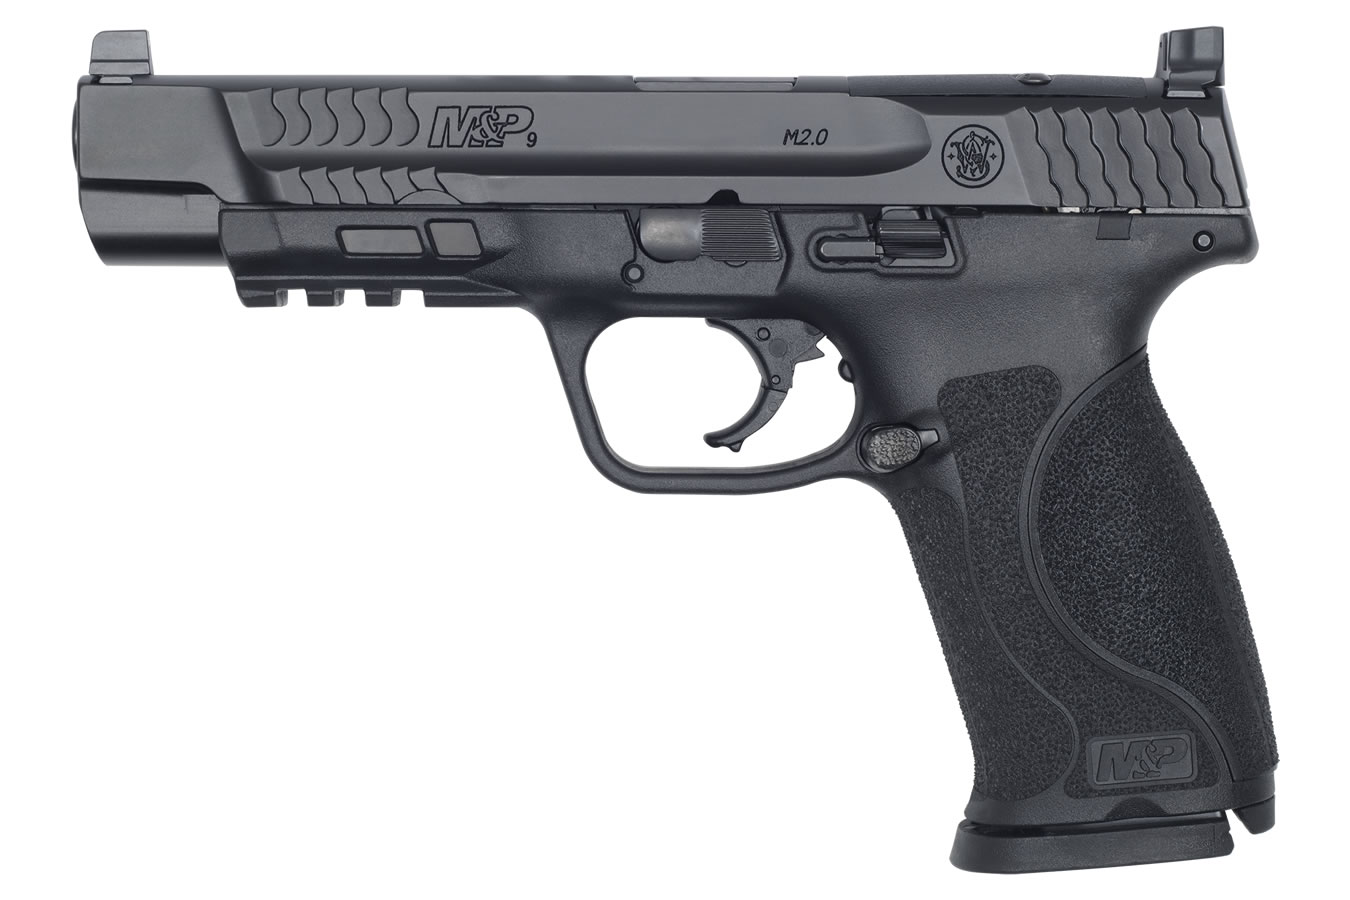 SMITH AND WESSON MP9 M2.0 FULL-SIZE 9MM OPTICS READY PISTOL (LE)